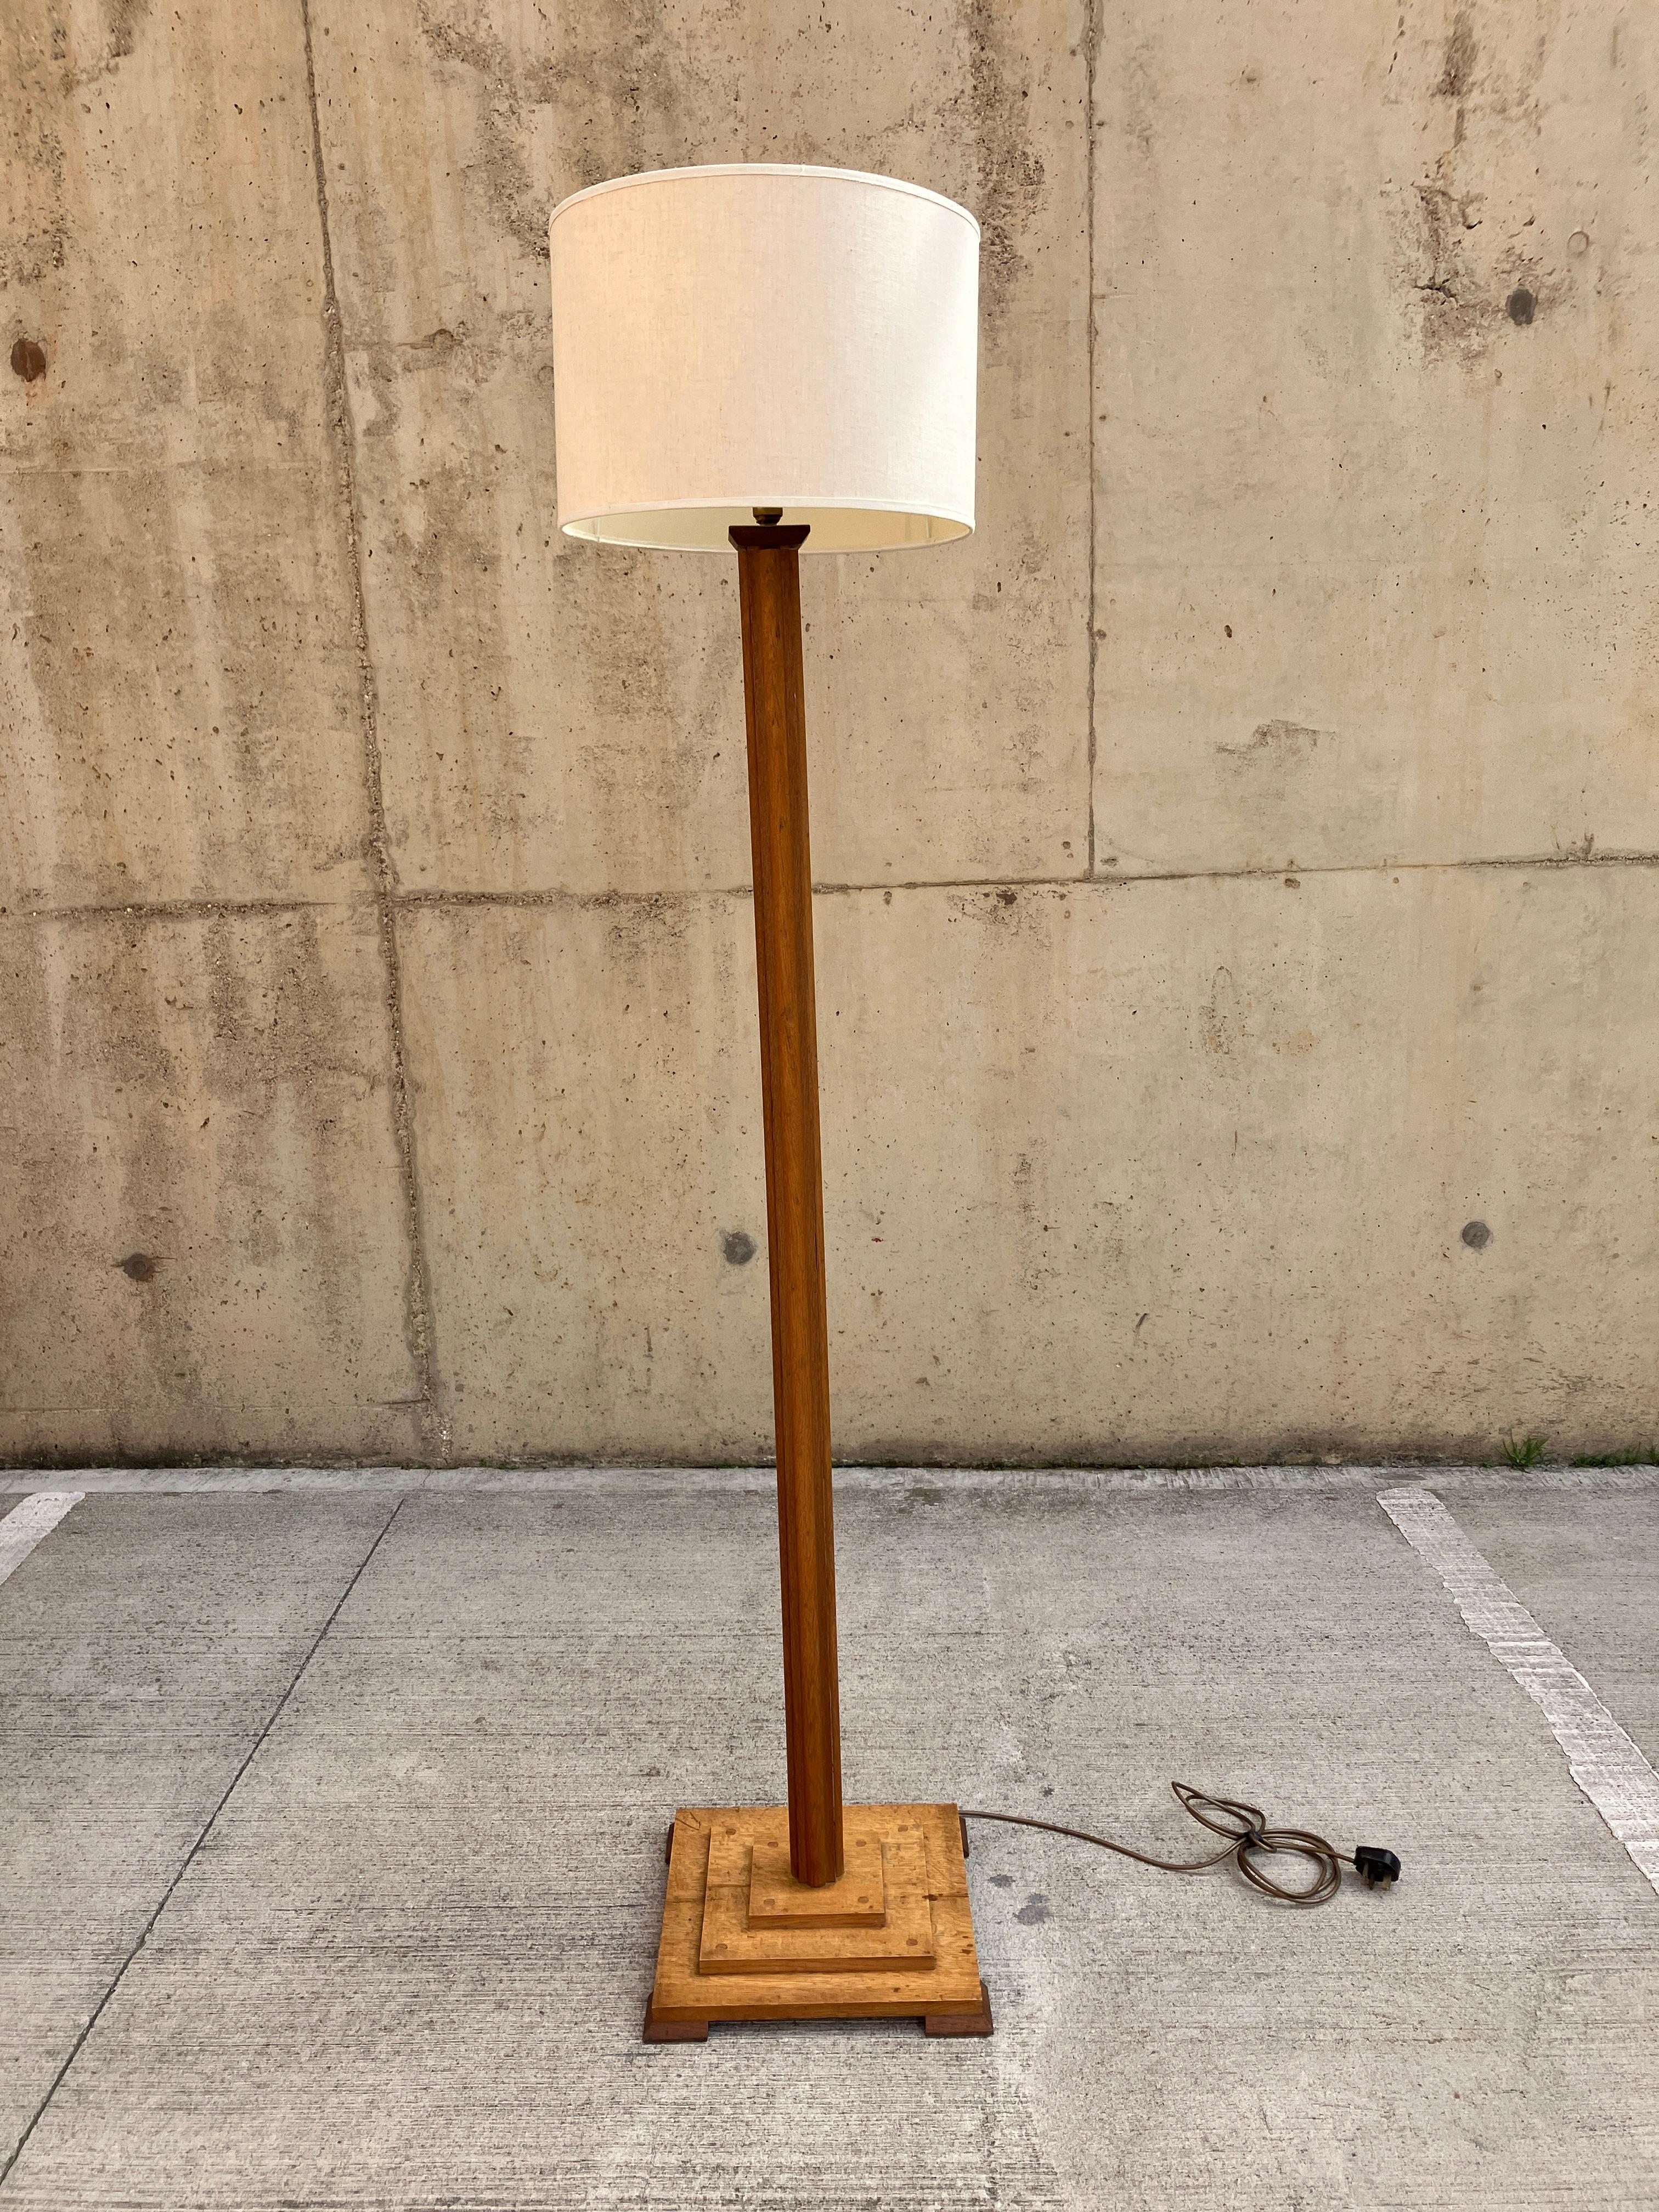 A gorgeous solid oak standard lamp. This floor lamp is from the Art Deco era from the 1920s. The lamp is very tall at 160cm (without the lampshade) and has an elegant decorative stem. The lamp is made of solid oak and has a natural blond oak finish